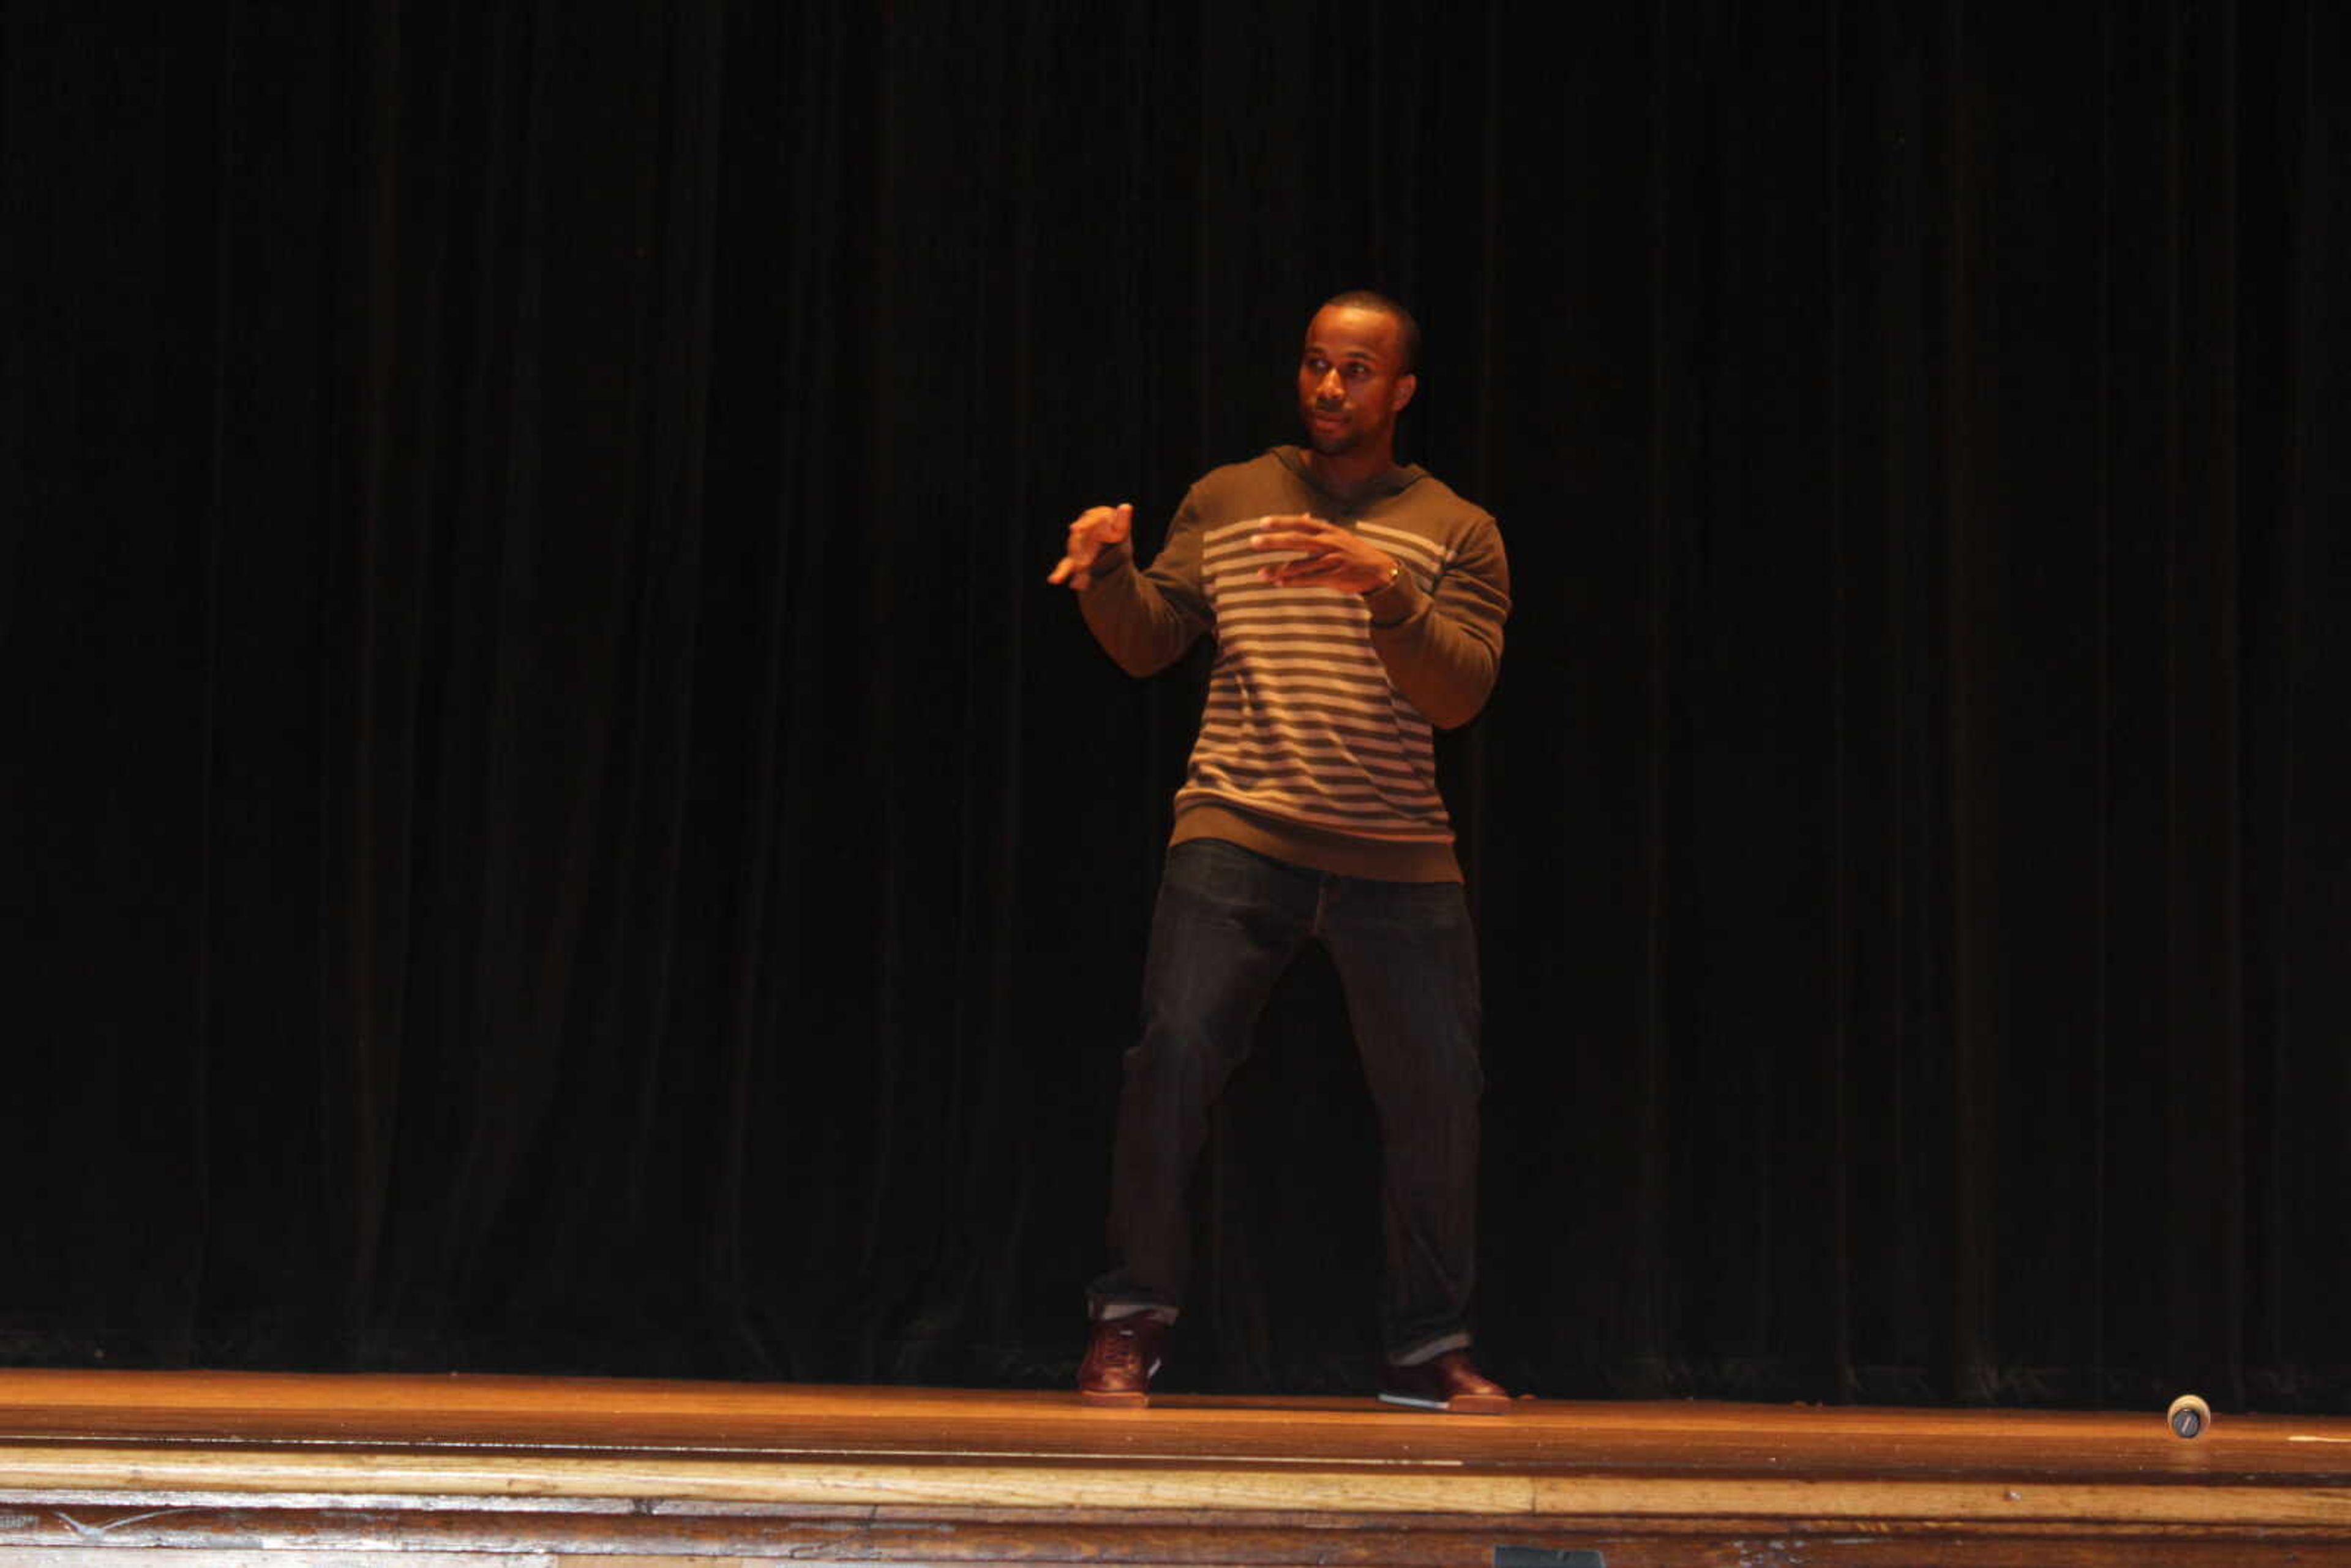 Comedian Jay Dukes hosted the Homecoming Planning Committee's annual talent show at 7 p.m. on Tuesday, Nov. 2 in the Academic Hall auditorium.